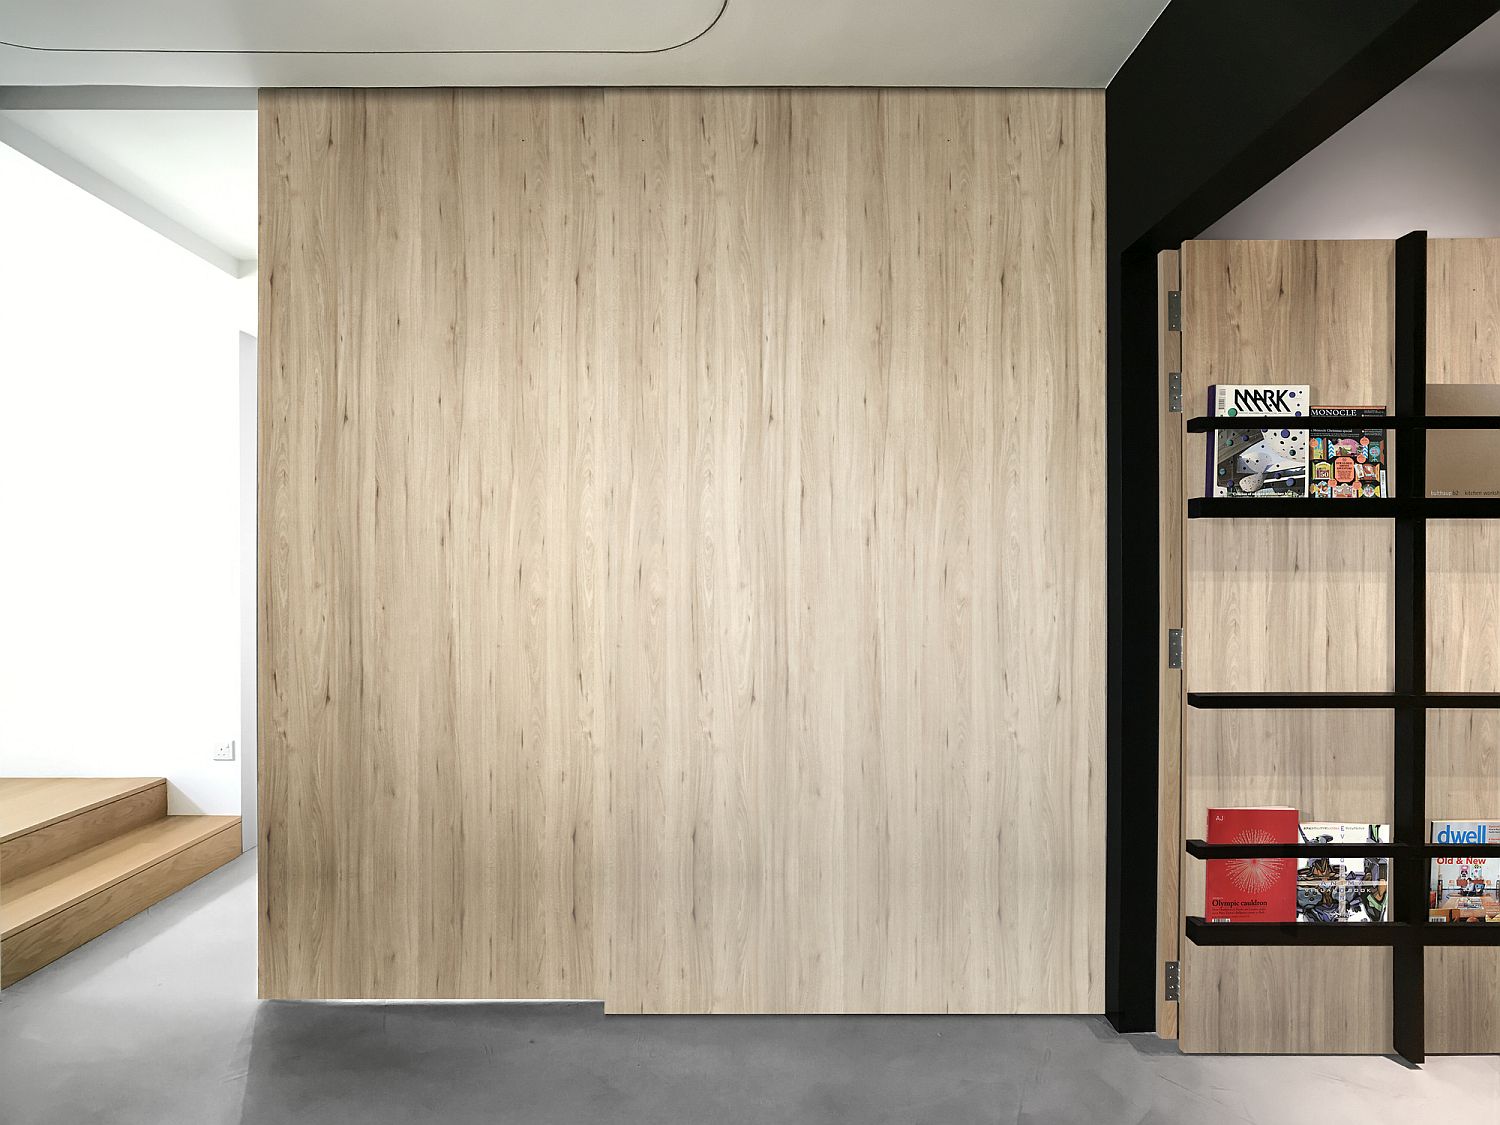 Sliding partitions and walls help shape a flexible and multi-tasking apartment